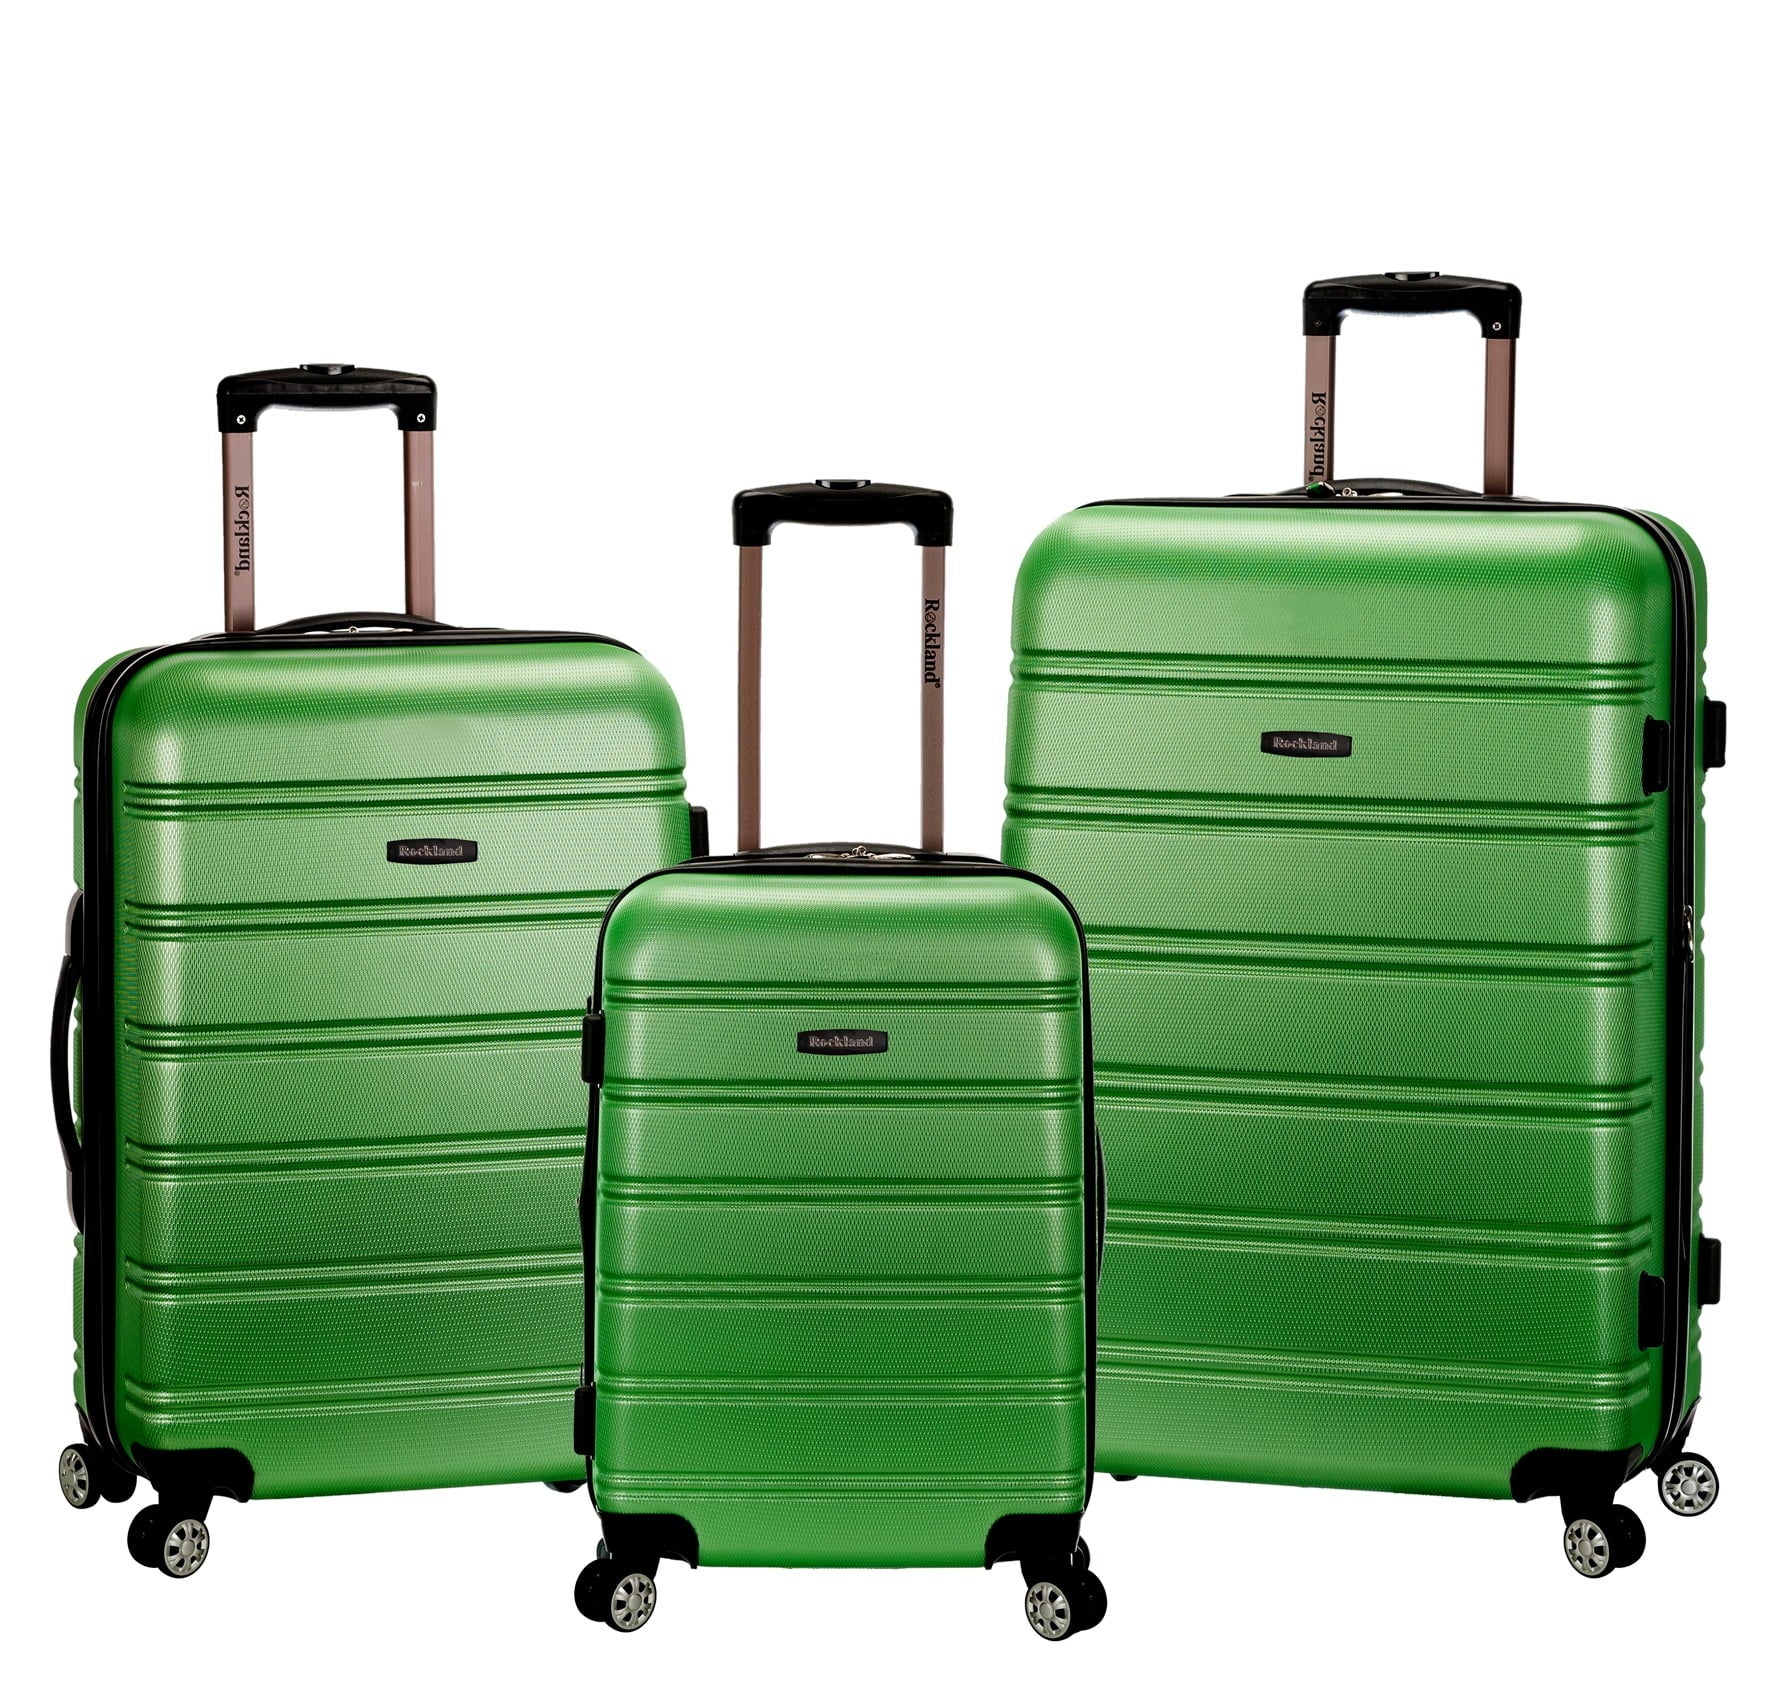 the green luggage set